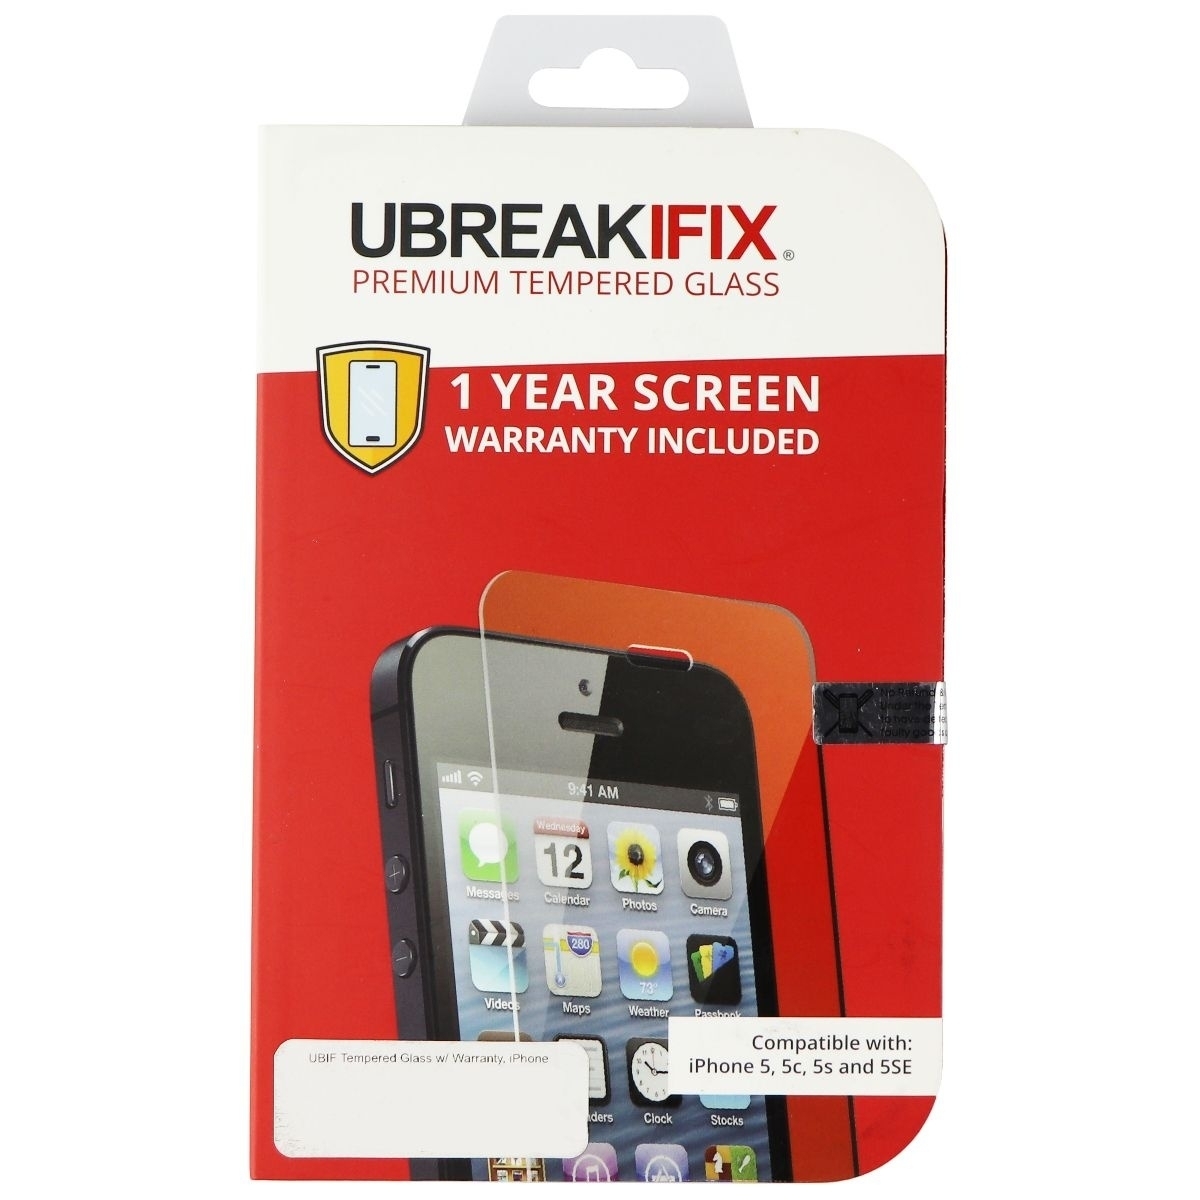 UBREAKIFIX Tempered Glass Screen Protector For Apple IPhone 5/5c/5s